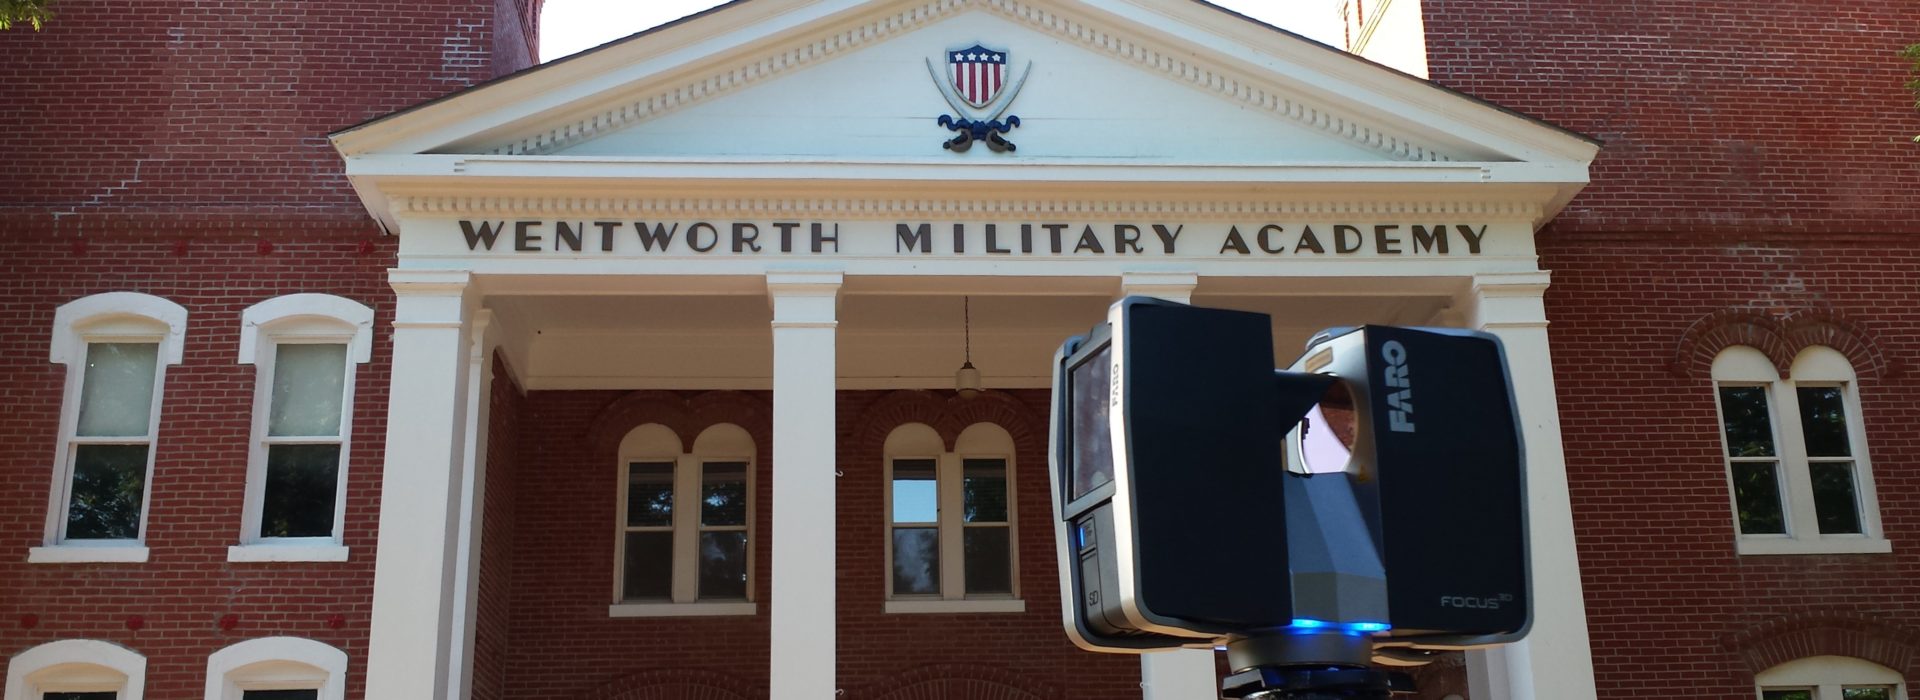 laser scanning Wentworth Military Academy Building